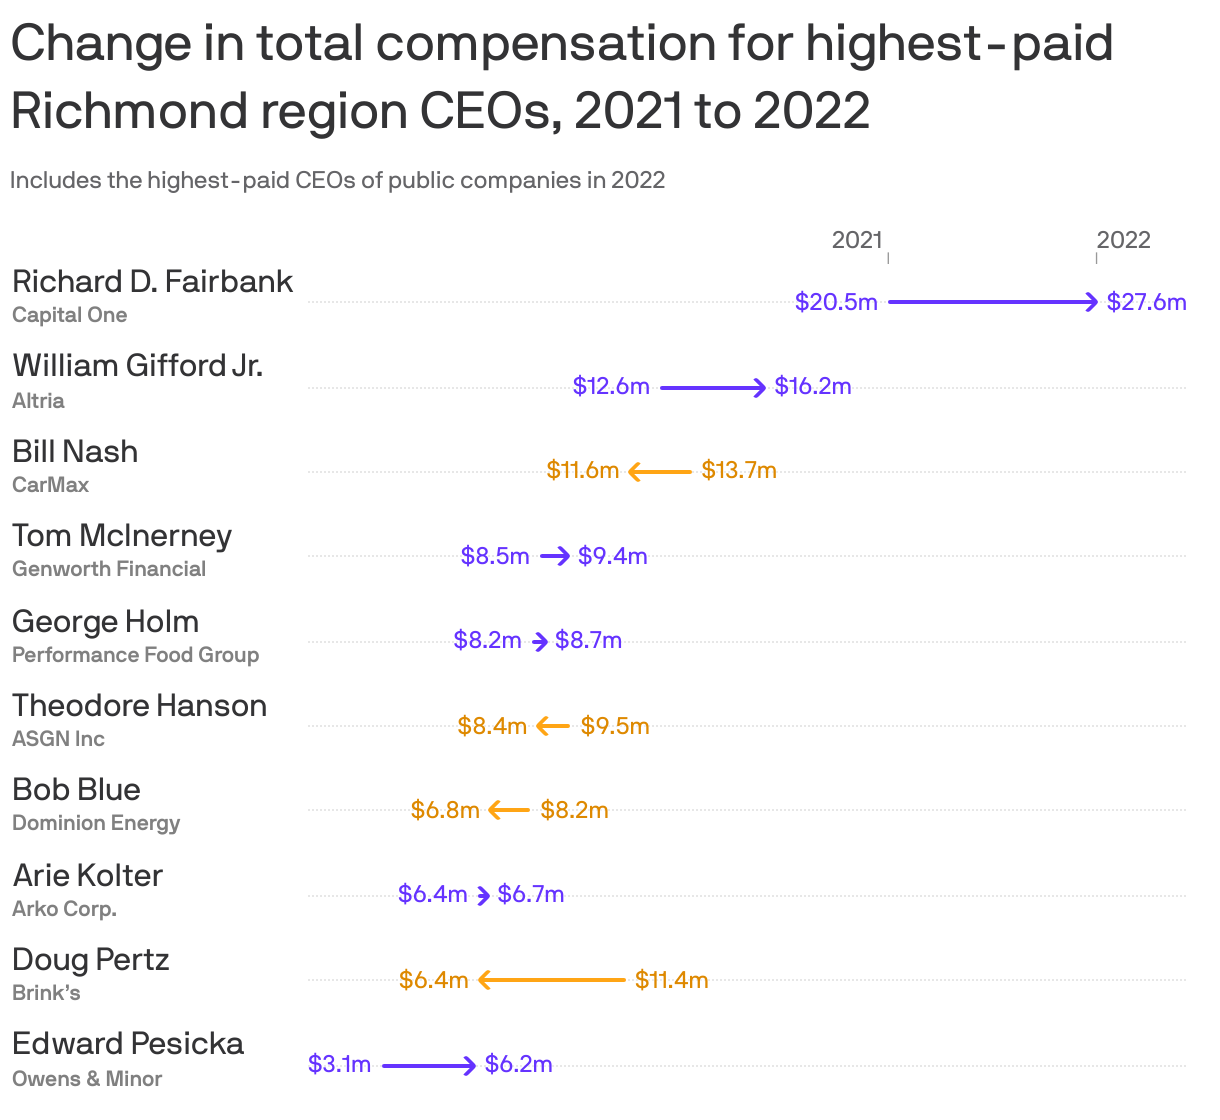 Change in total compensation for highest-paid Richmond region CEOs, 2021 to 2022